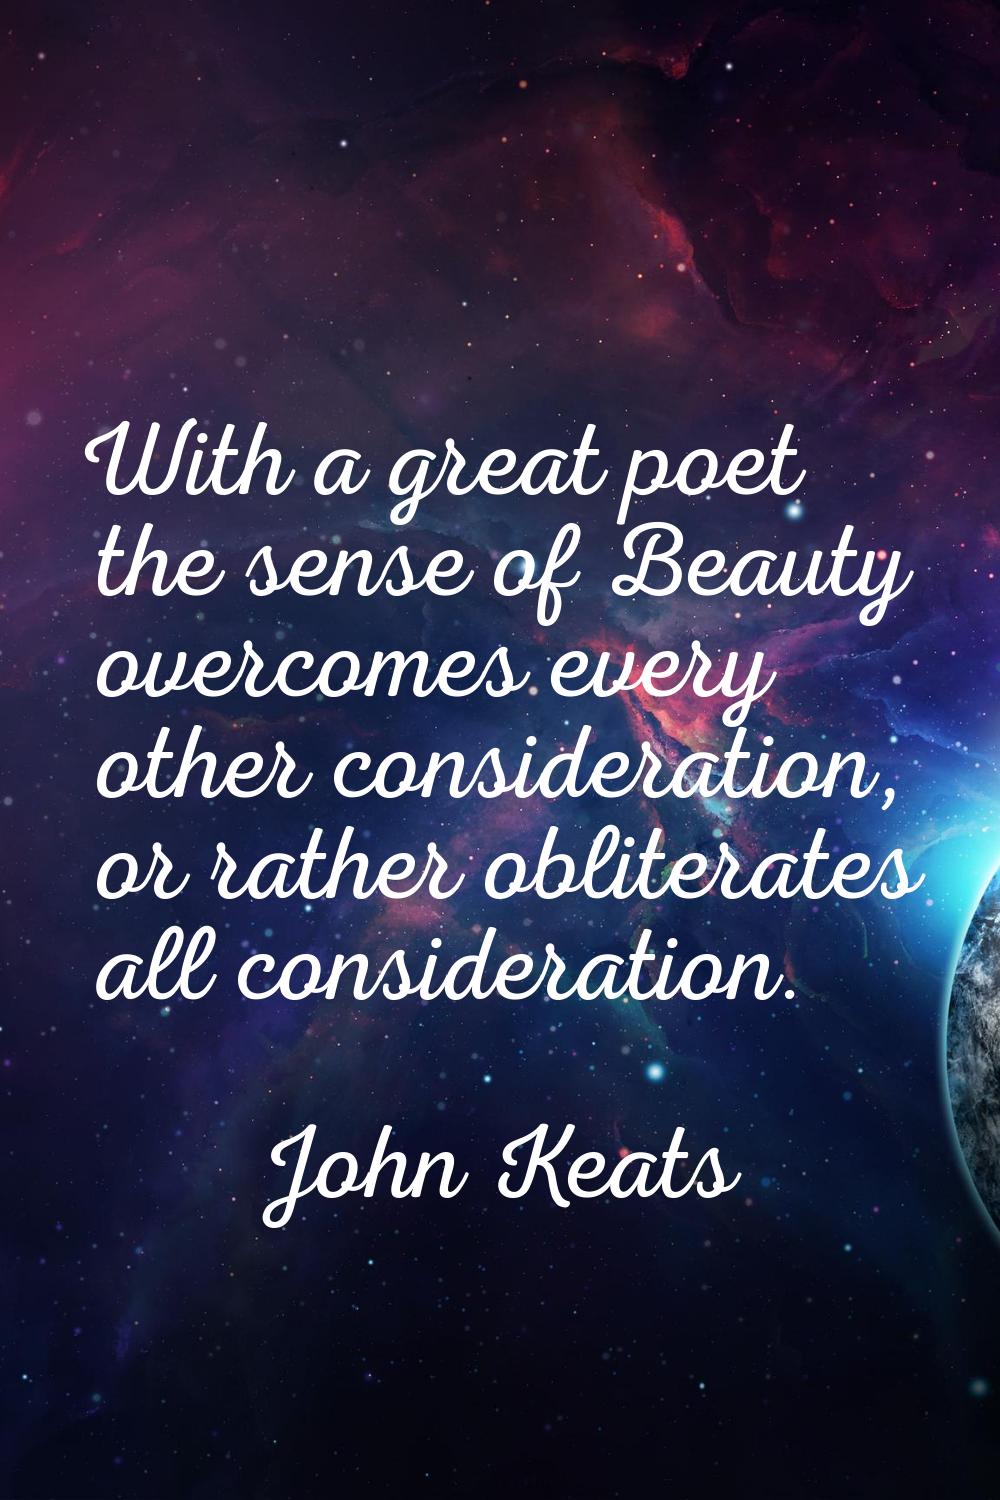 With a great poet the sense of Beauty overcomes every other consideration, or rather obliterates al